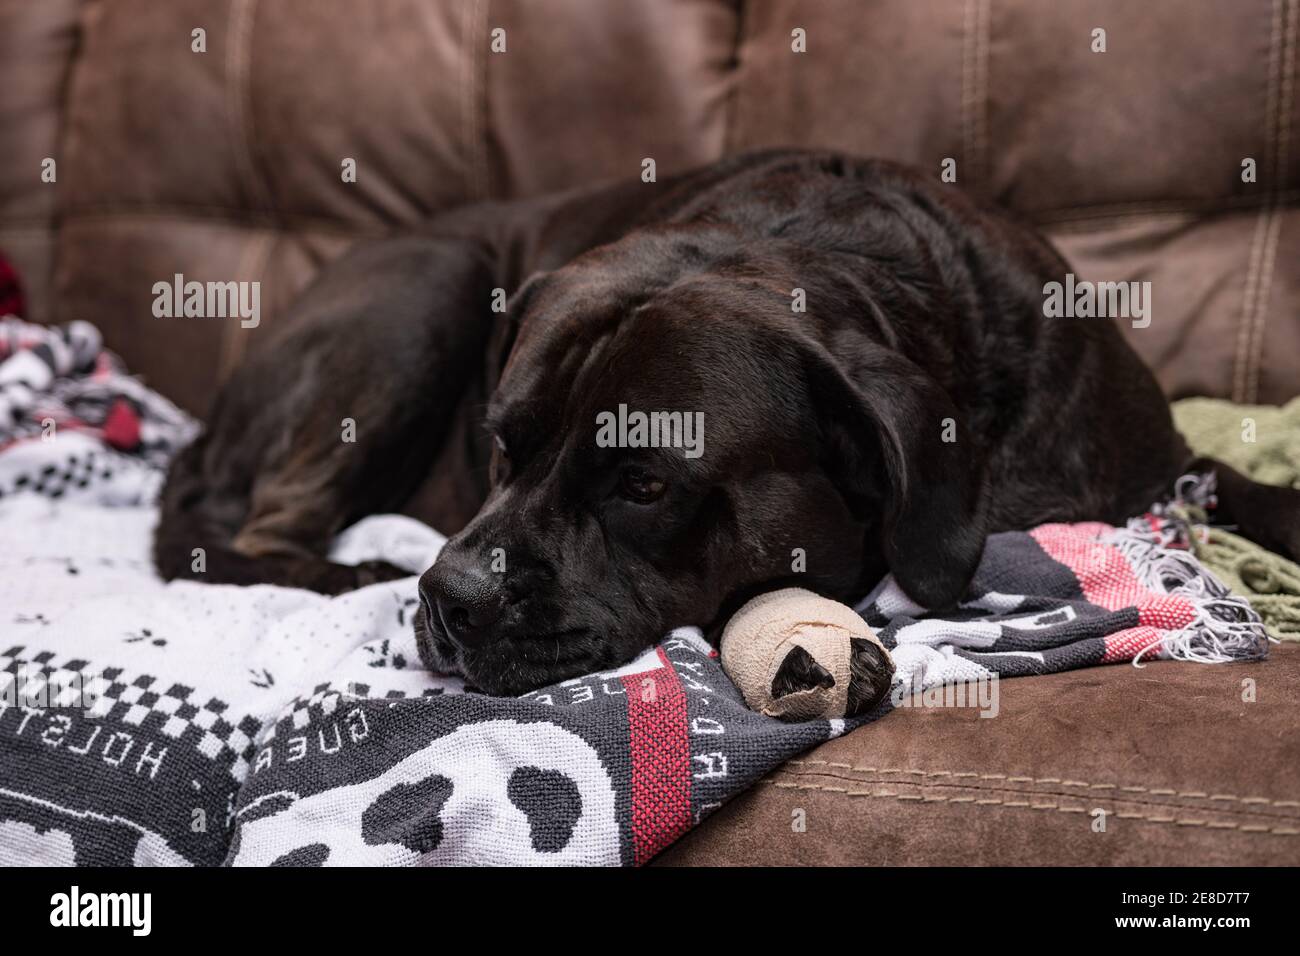 Black Labrador crossbred dog with a bandaged foot lying on blankets on a leather couch resting Stock Photo